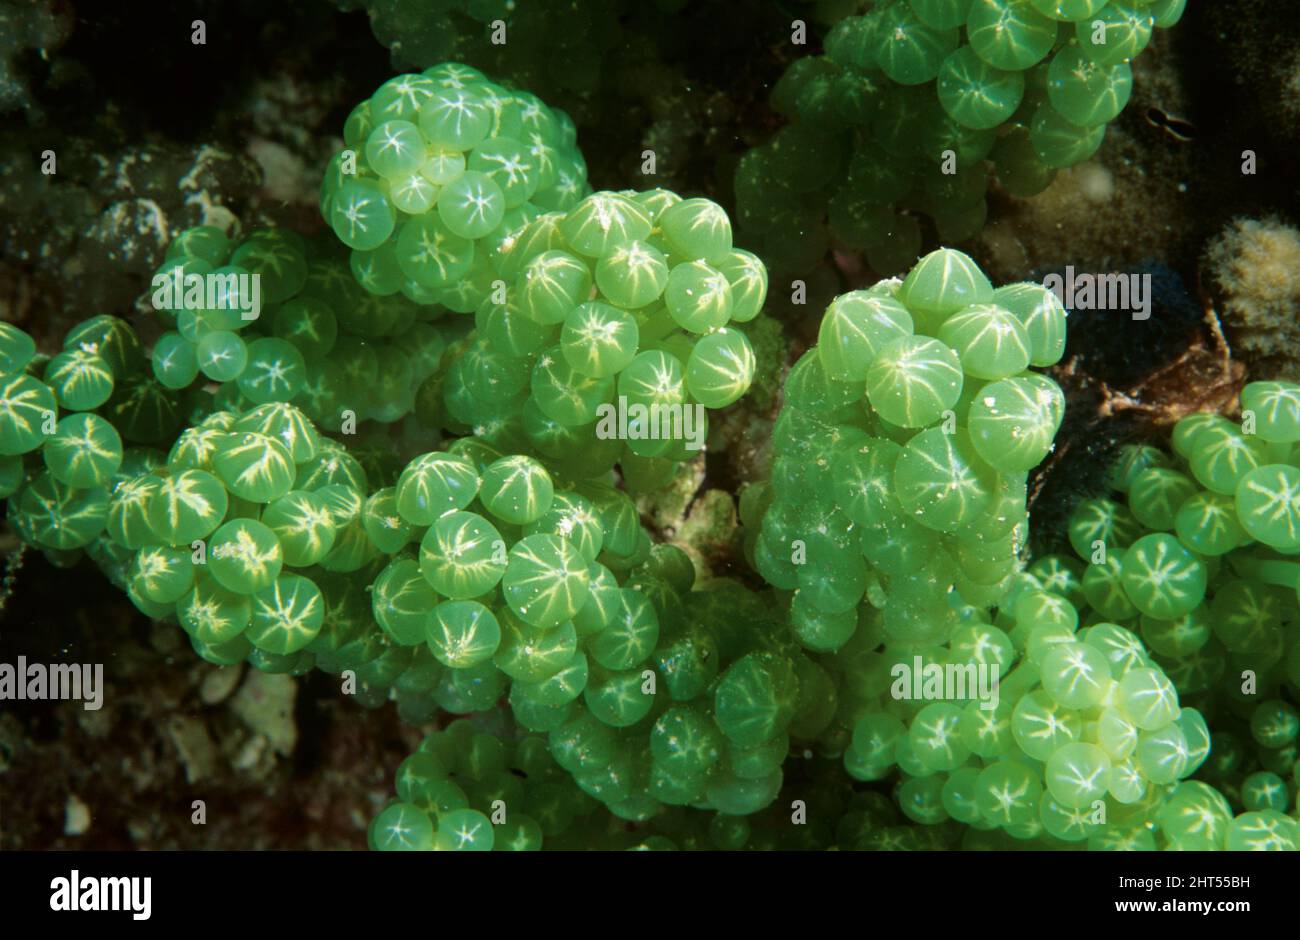 Grape weed (Caulerpa racemosa), edible green algae. Has invasive properties and has spread widely in the Mediterranean since the early 1990s. Stock Photo